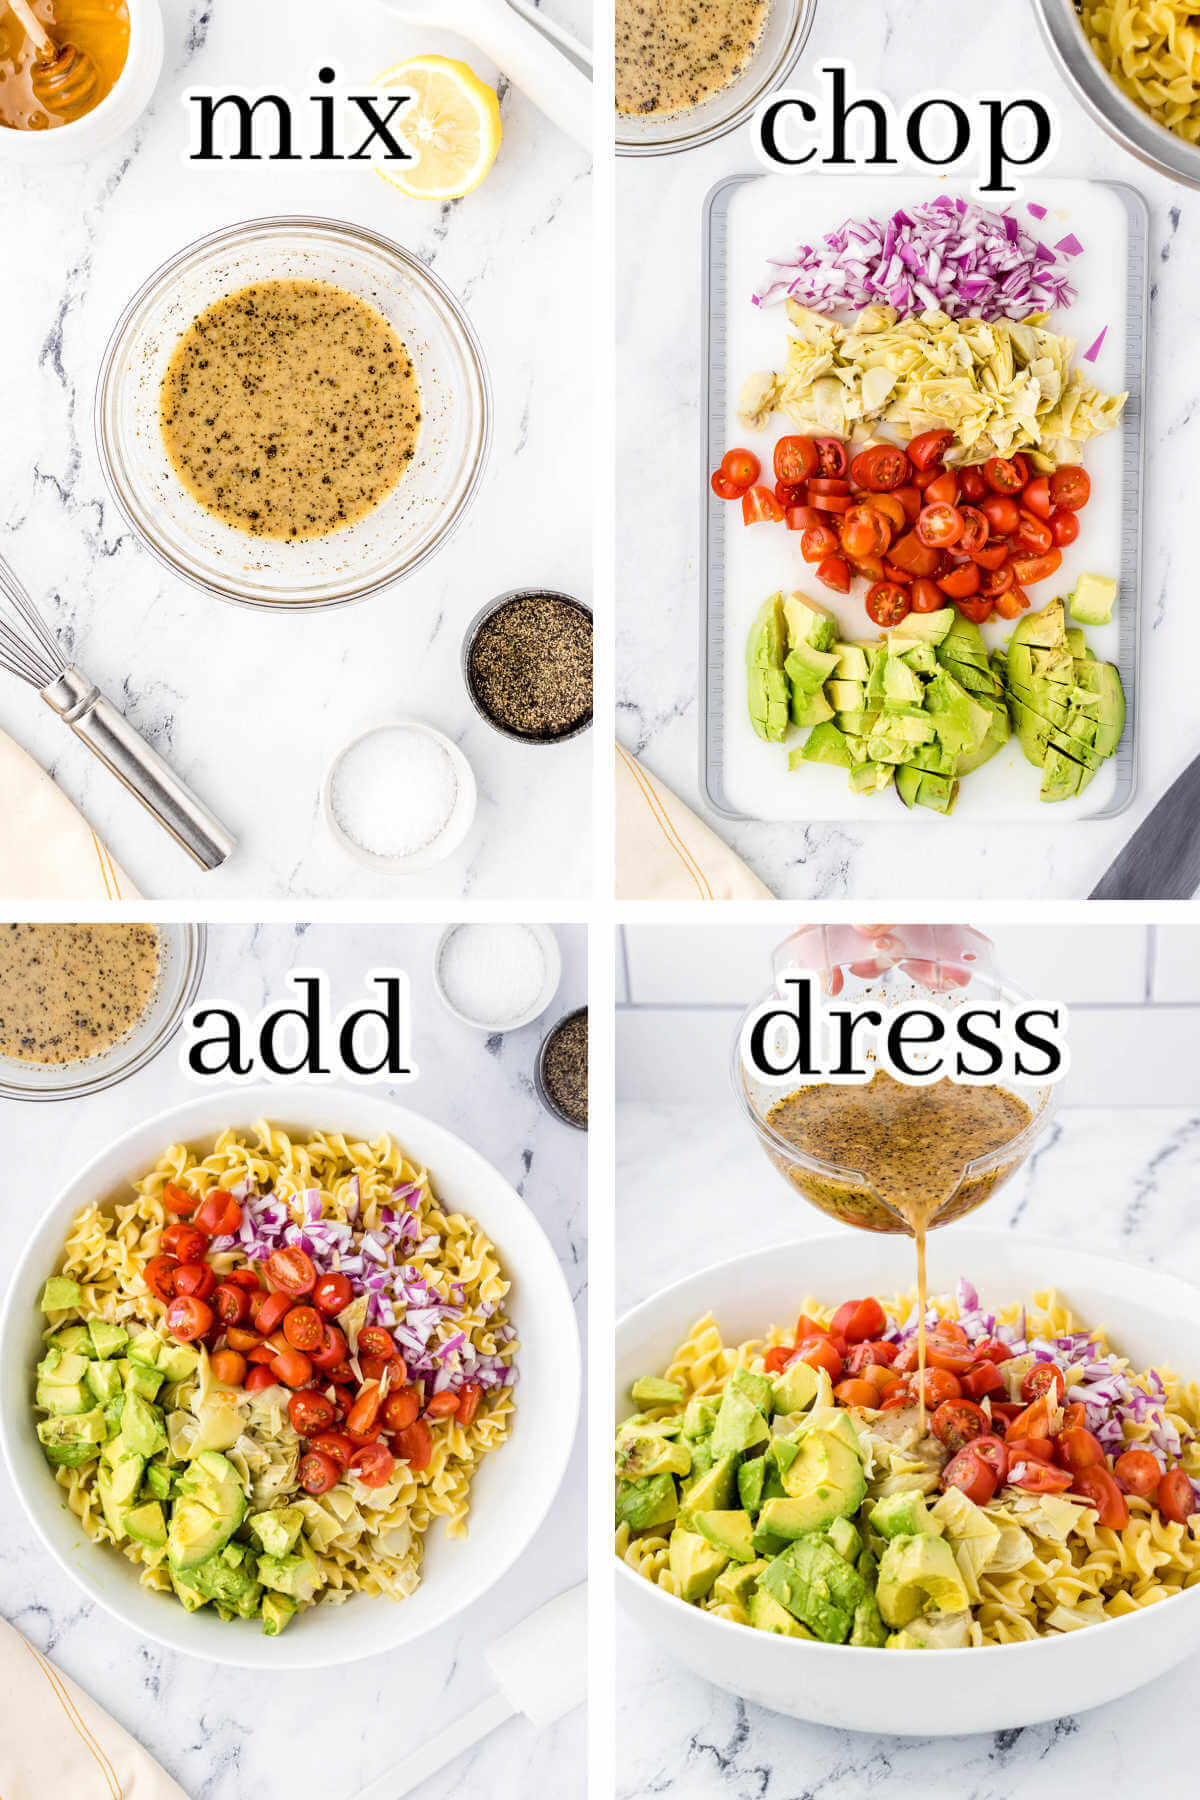 Step-by-step instructions to make pasta salad, with print overlay.